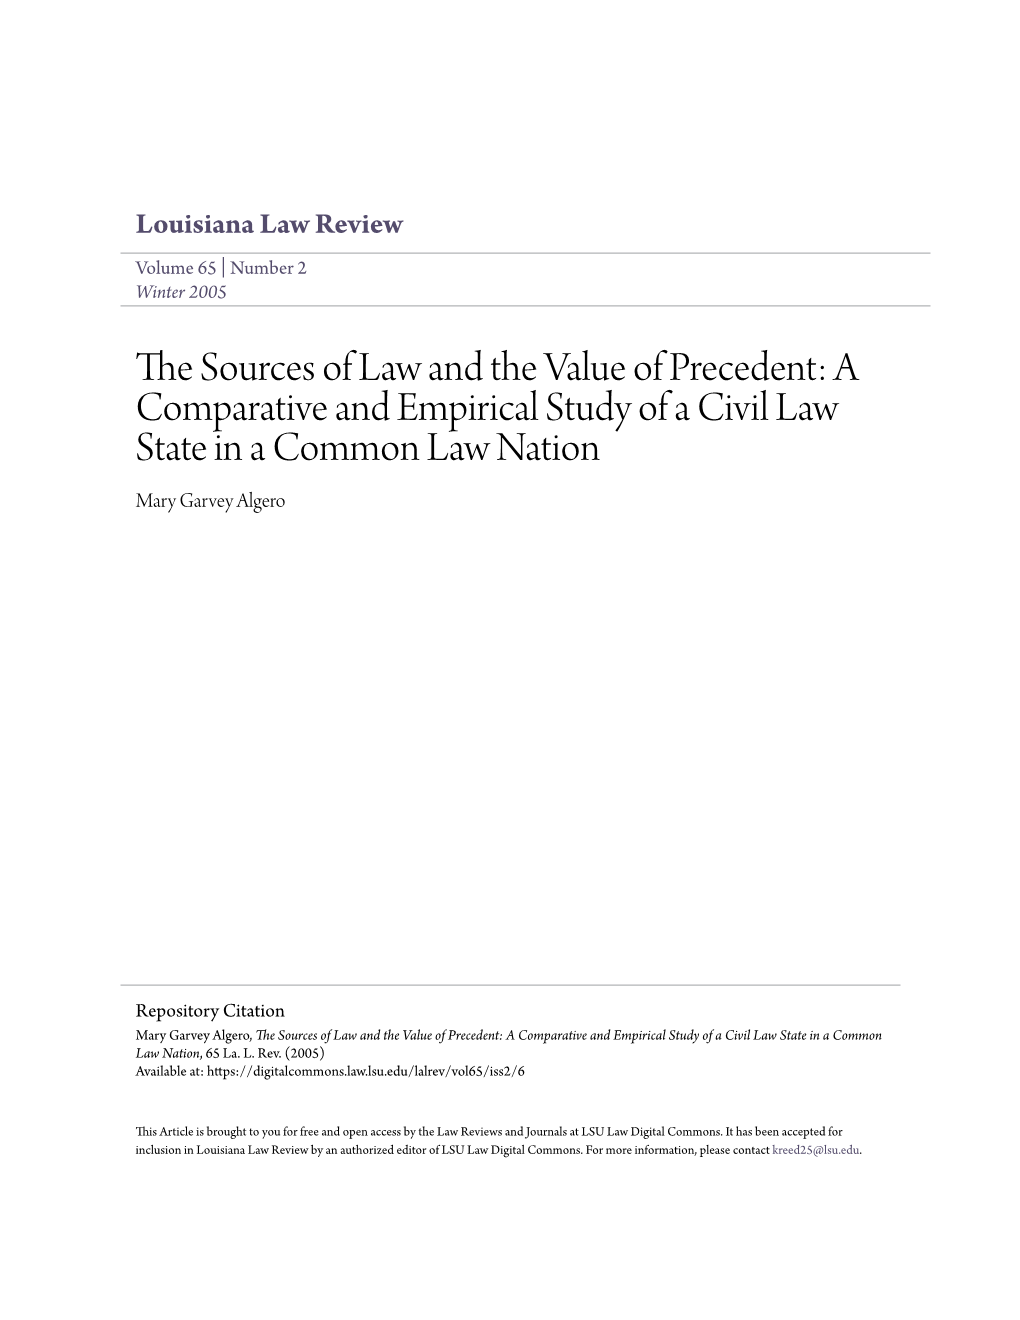 The Sources of Law and the Value of Precedent: a Comparative and Empirical Study of a Civil Law State in a Common Law Nation, 65 La